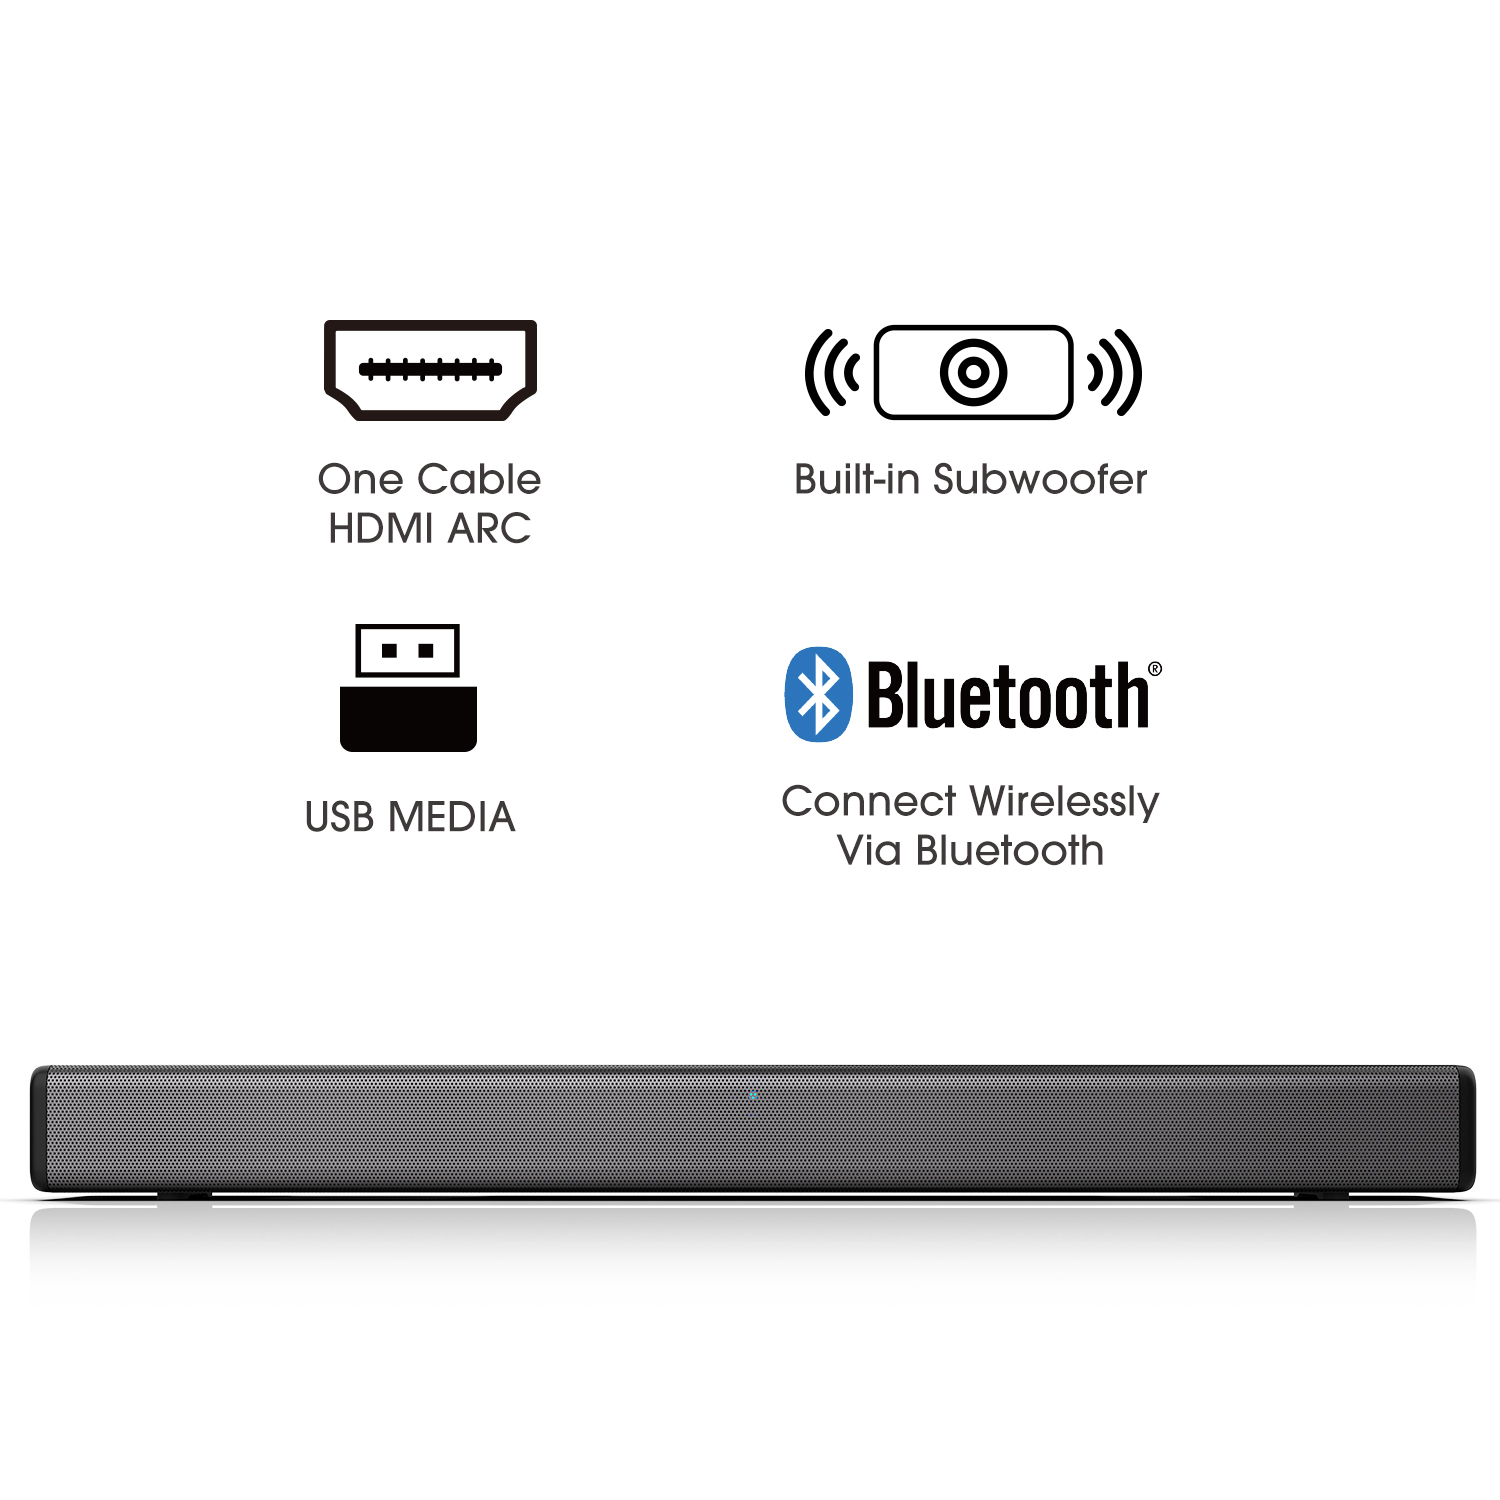 Hisense HS214 2.1 Channel Sound Bar with Built-in Subwoofer - image 3 of 15